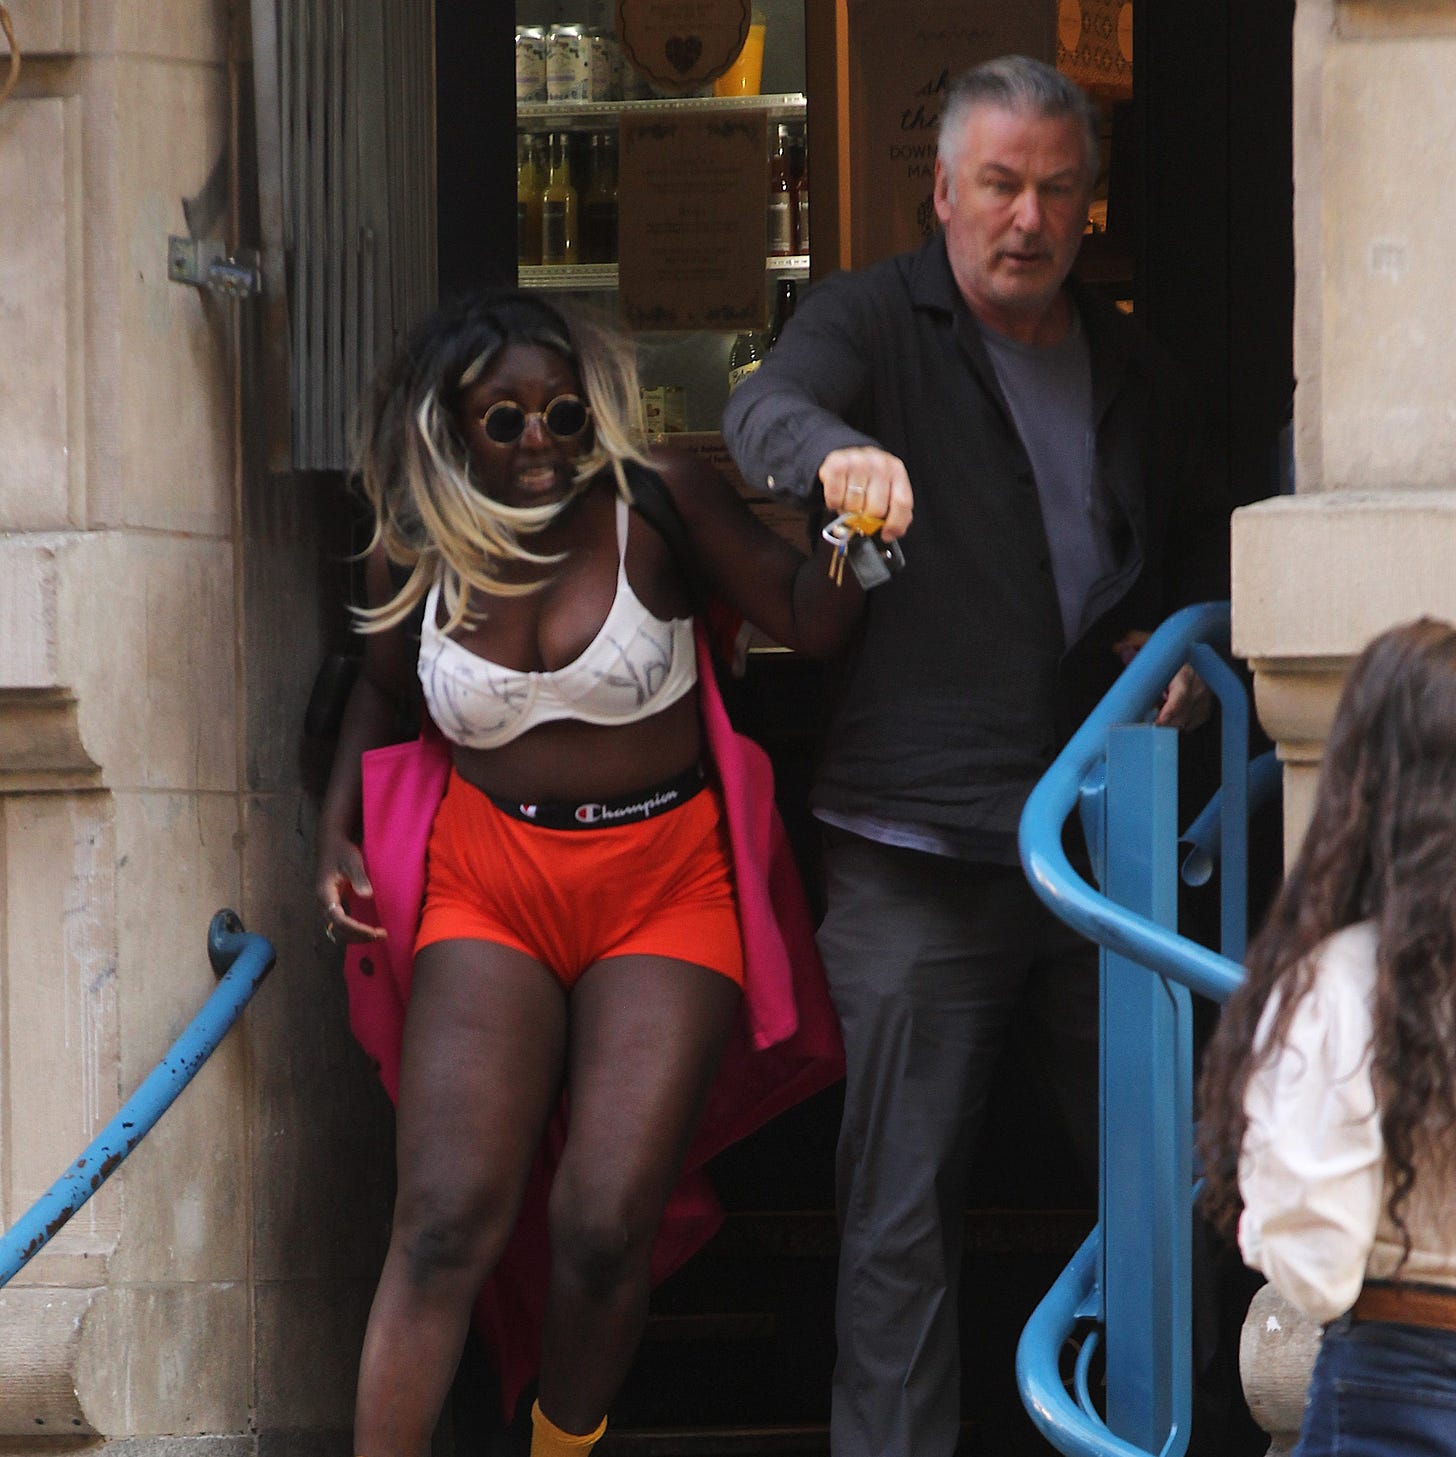 Crackhead Barney and Alec Baldwin scuffle over her phone outside the coffee shop Monday